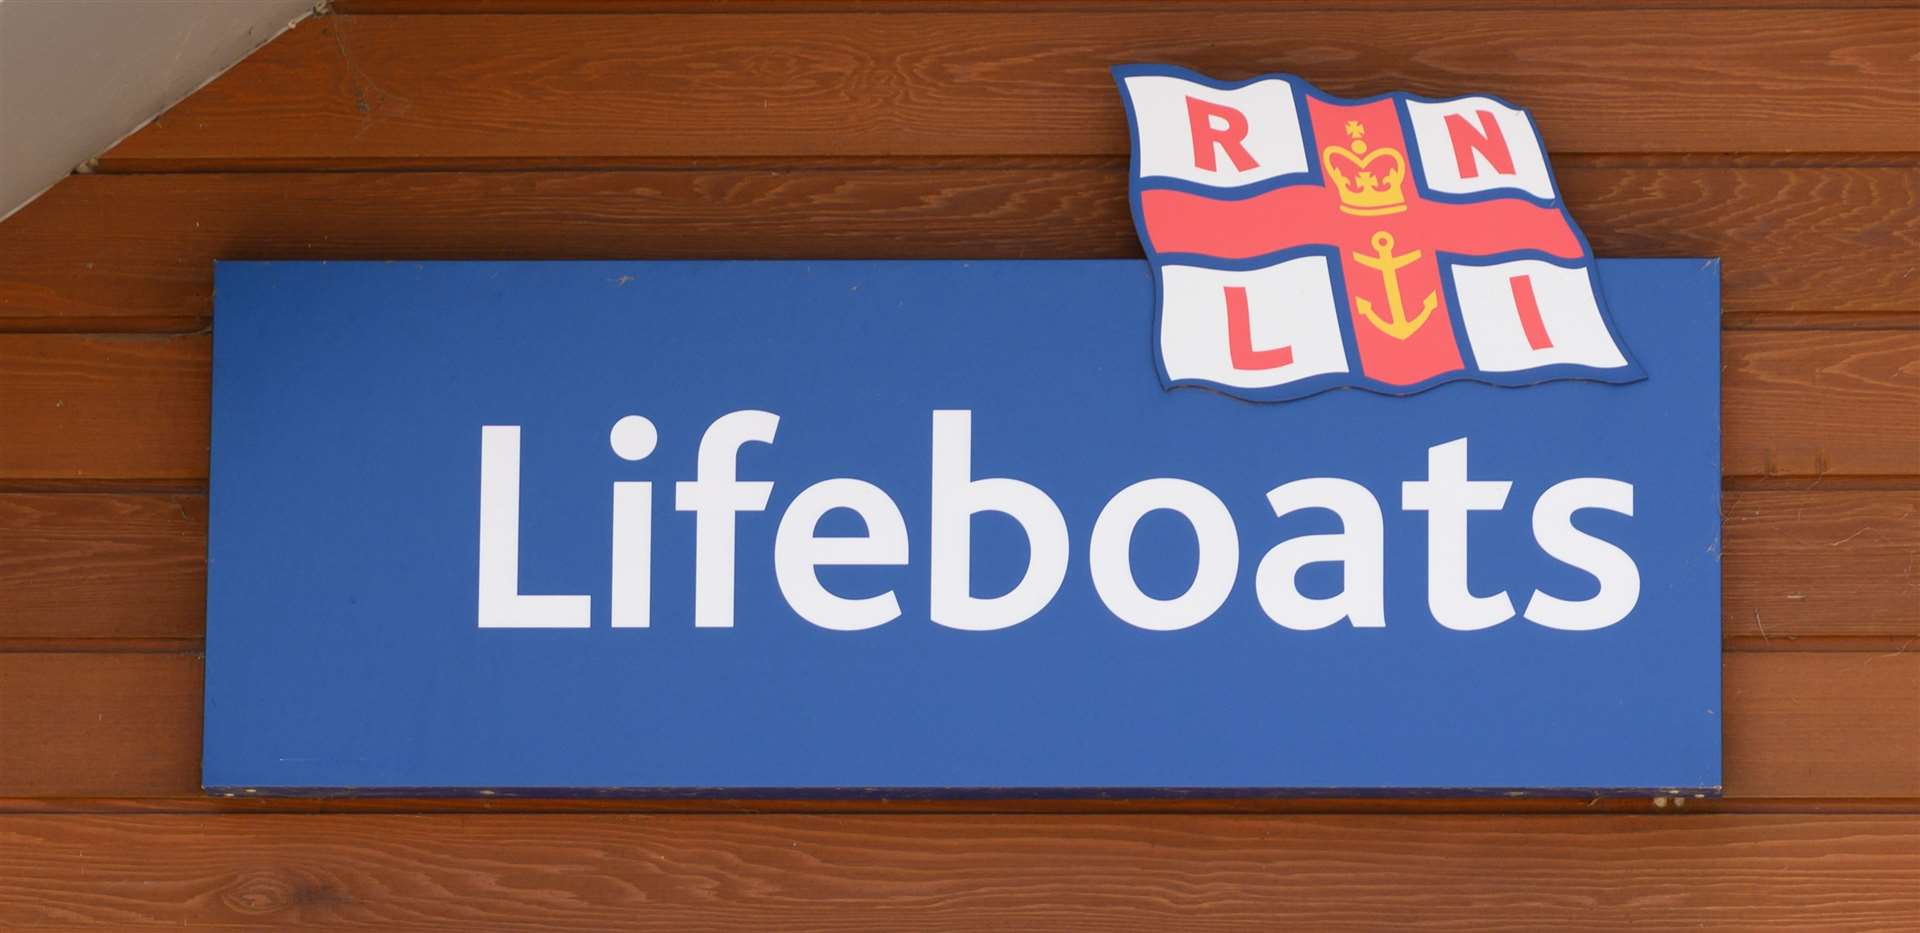 The Royal Naval Lifeboat Institution (RNLI) celebrates its 200th anniversary today.